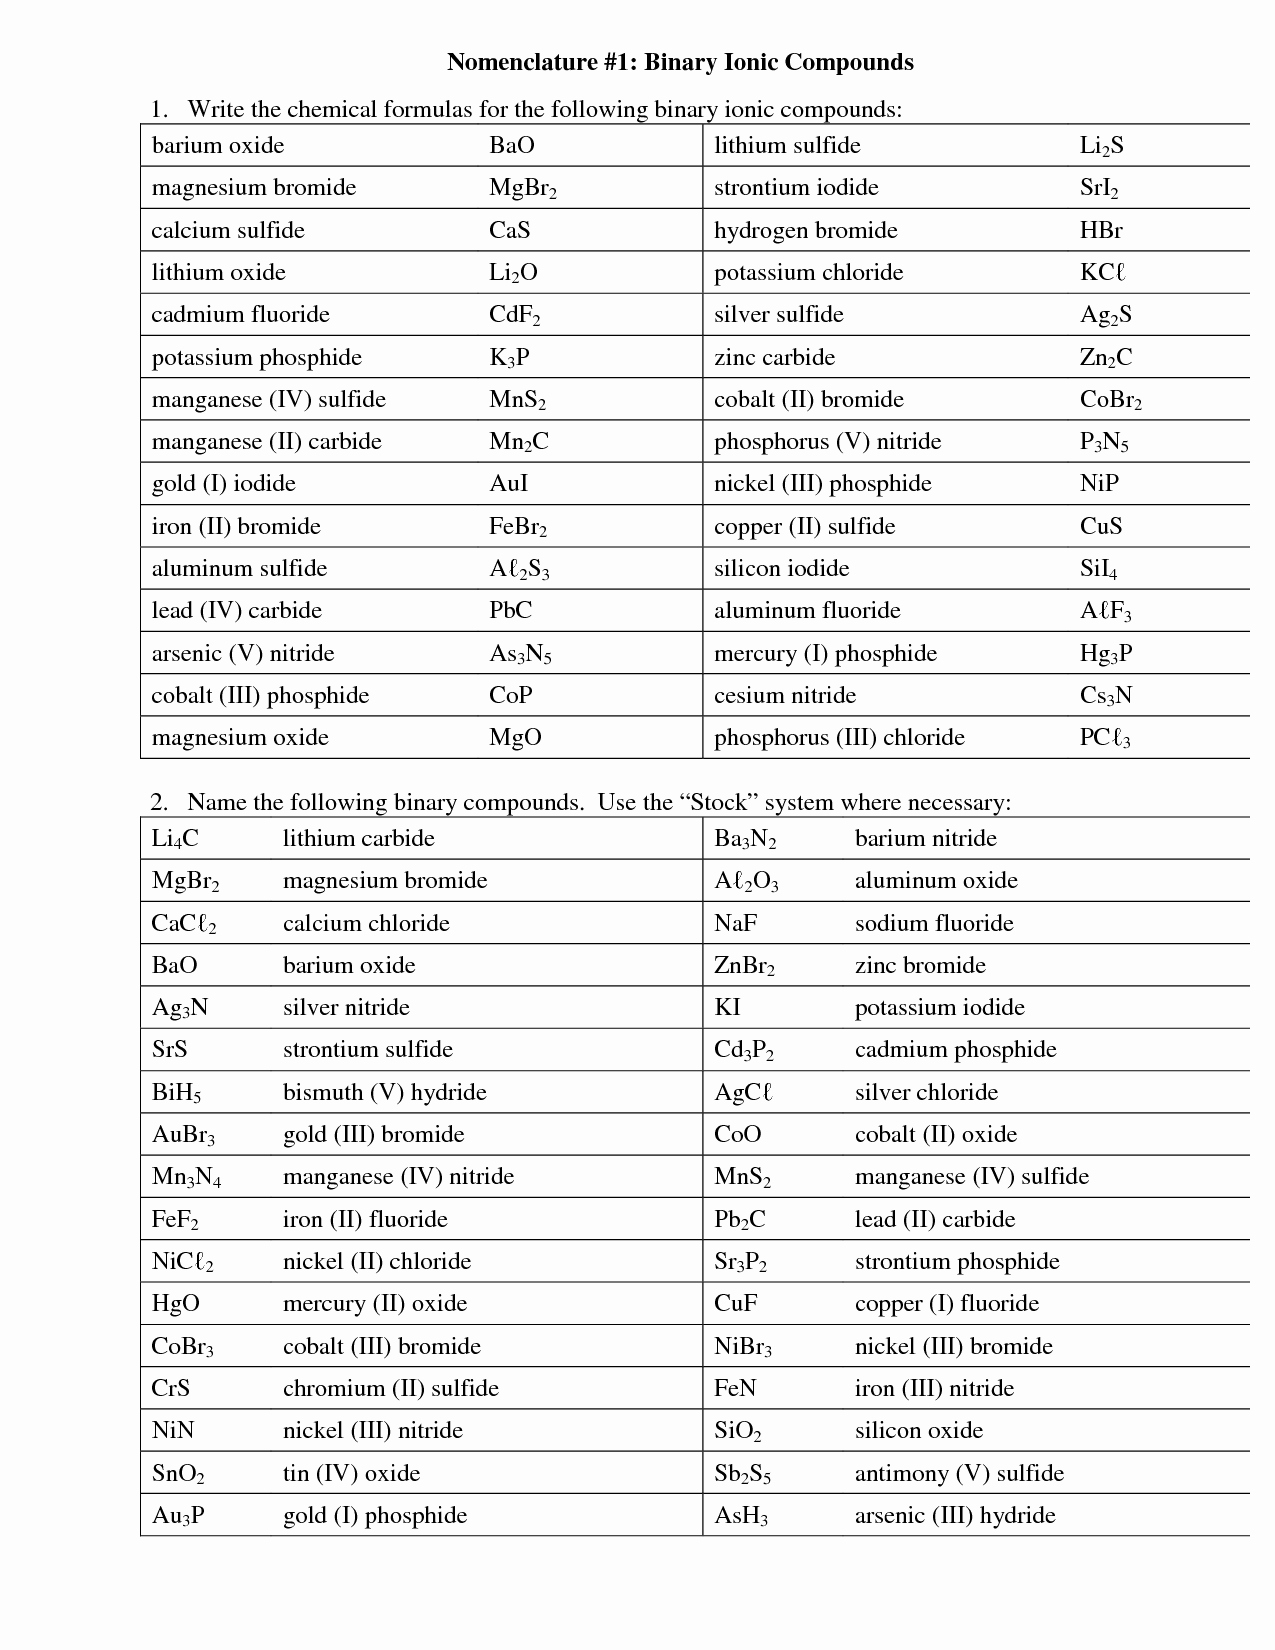 Simple Binary Ionic Compounds Worksheet Beautiful 47 Binary Ionic Pounds Worksheet Answers Binary Ionic